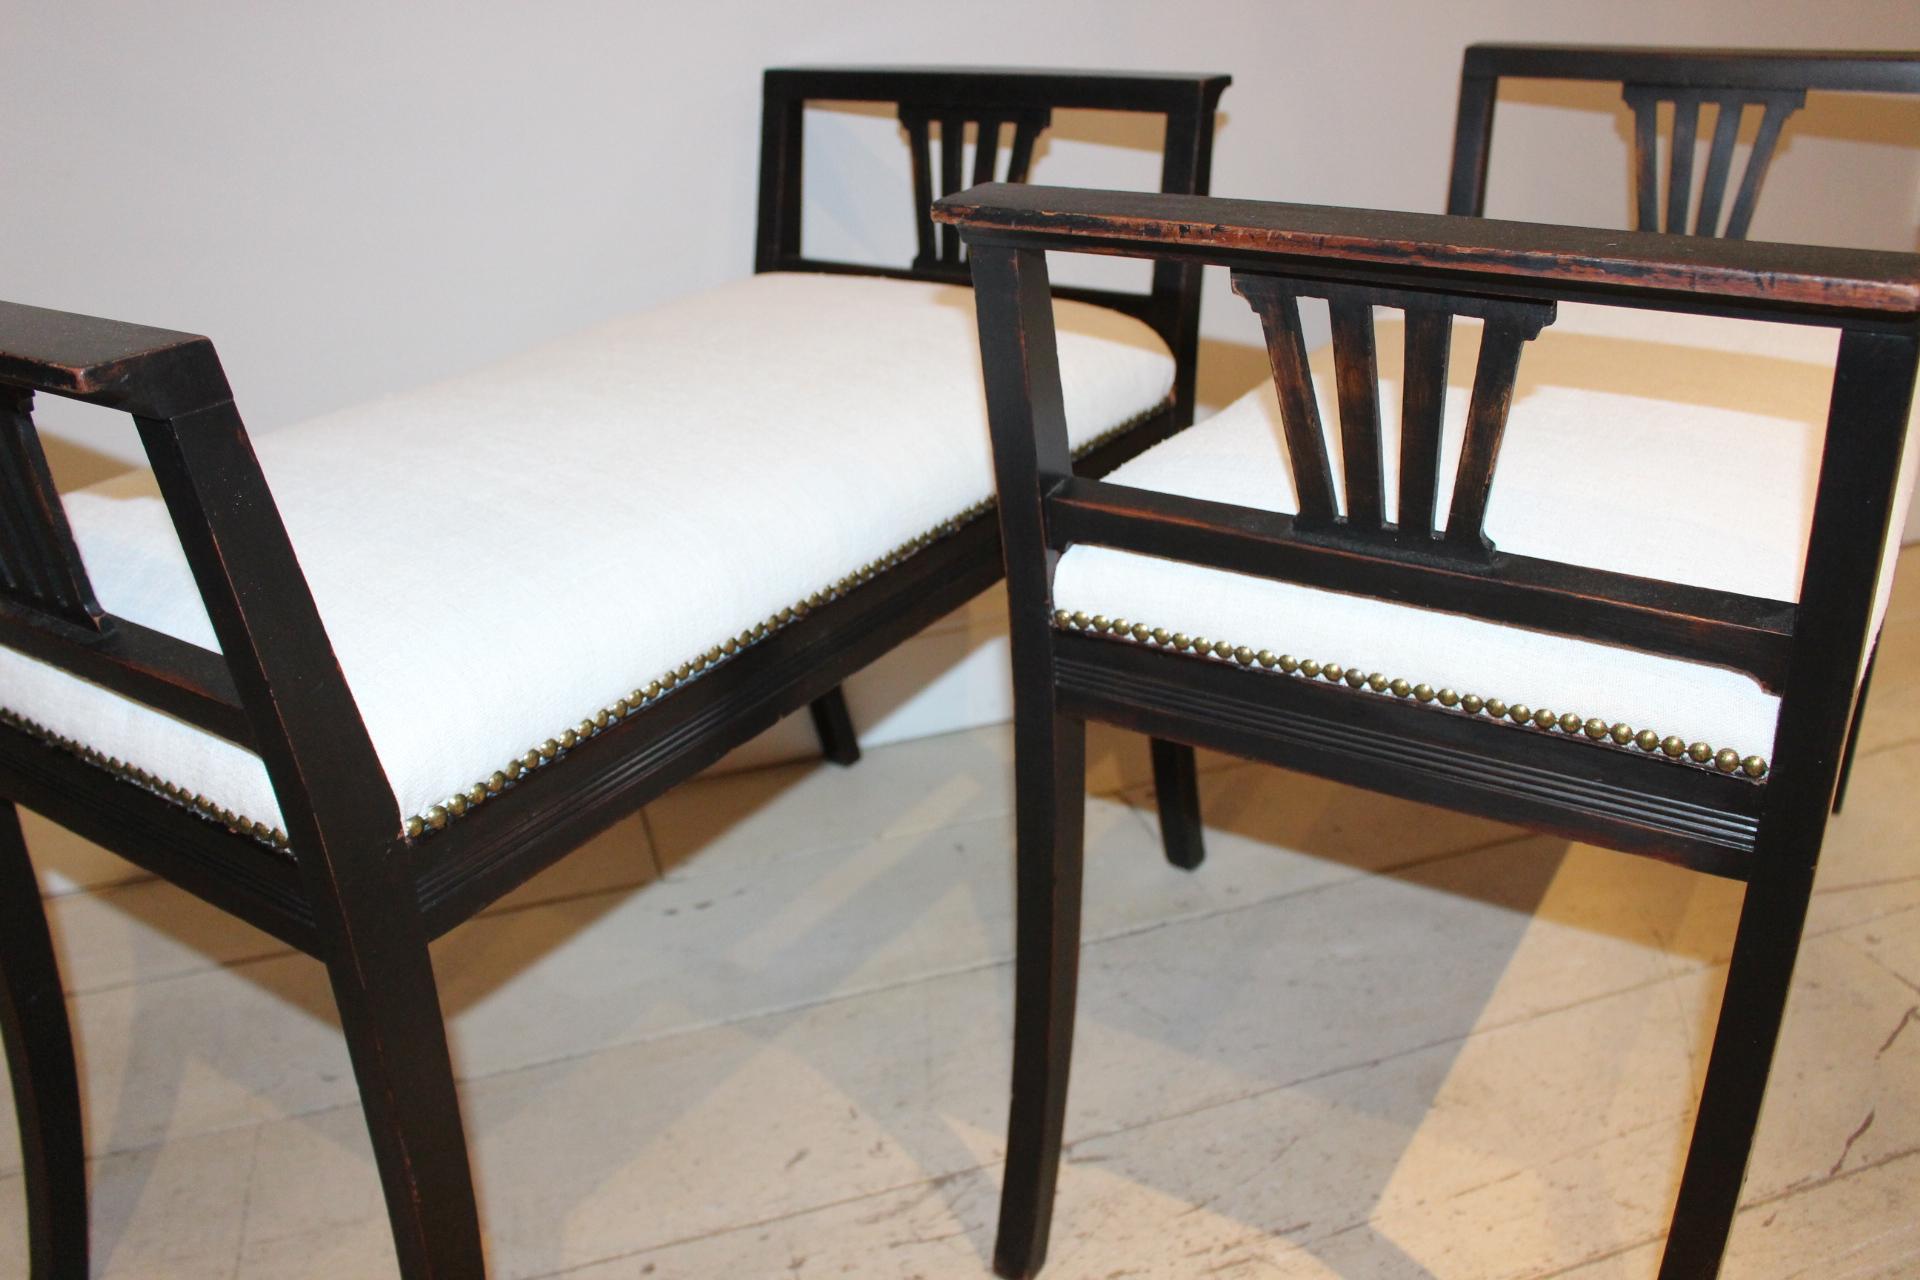 A striking pair of 1920s ebonized high-sided Swedish stools with arms. The stools are unusual due to their longer size and have been upholstered in a vintage French linen with gold speckled beading to the sides. The stools would work well in a